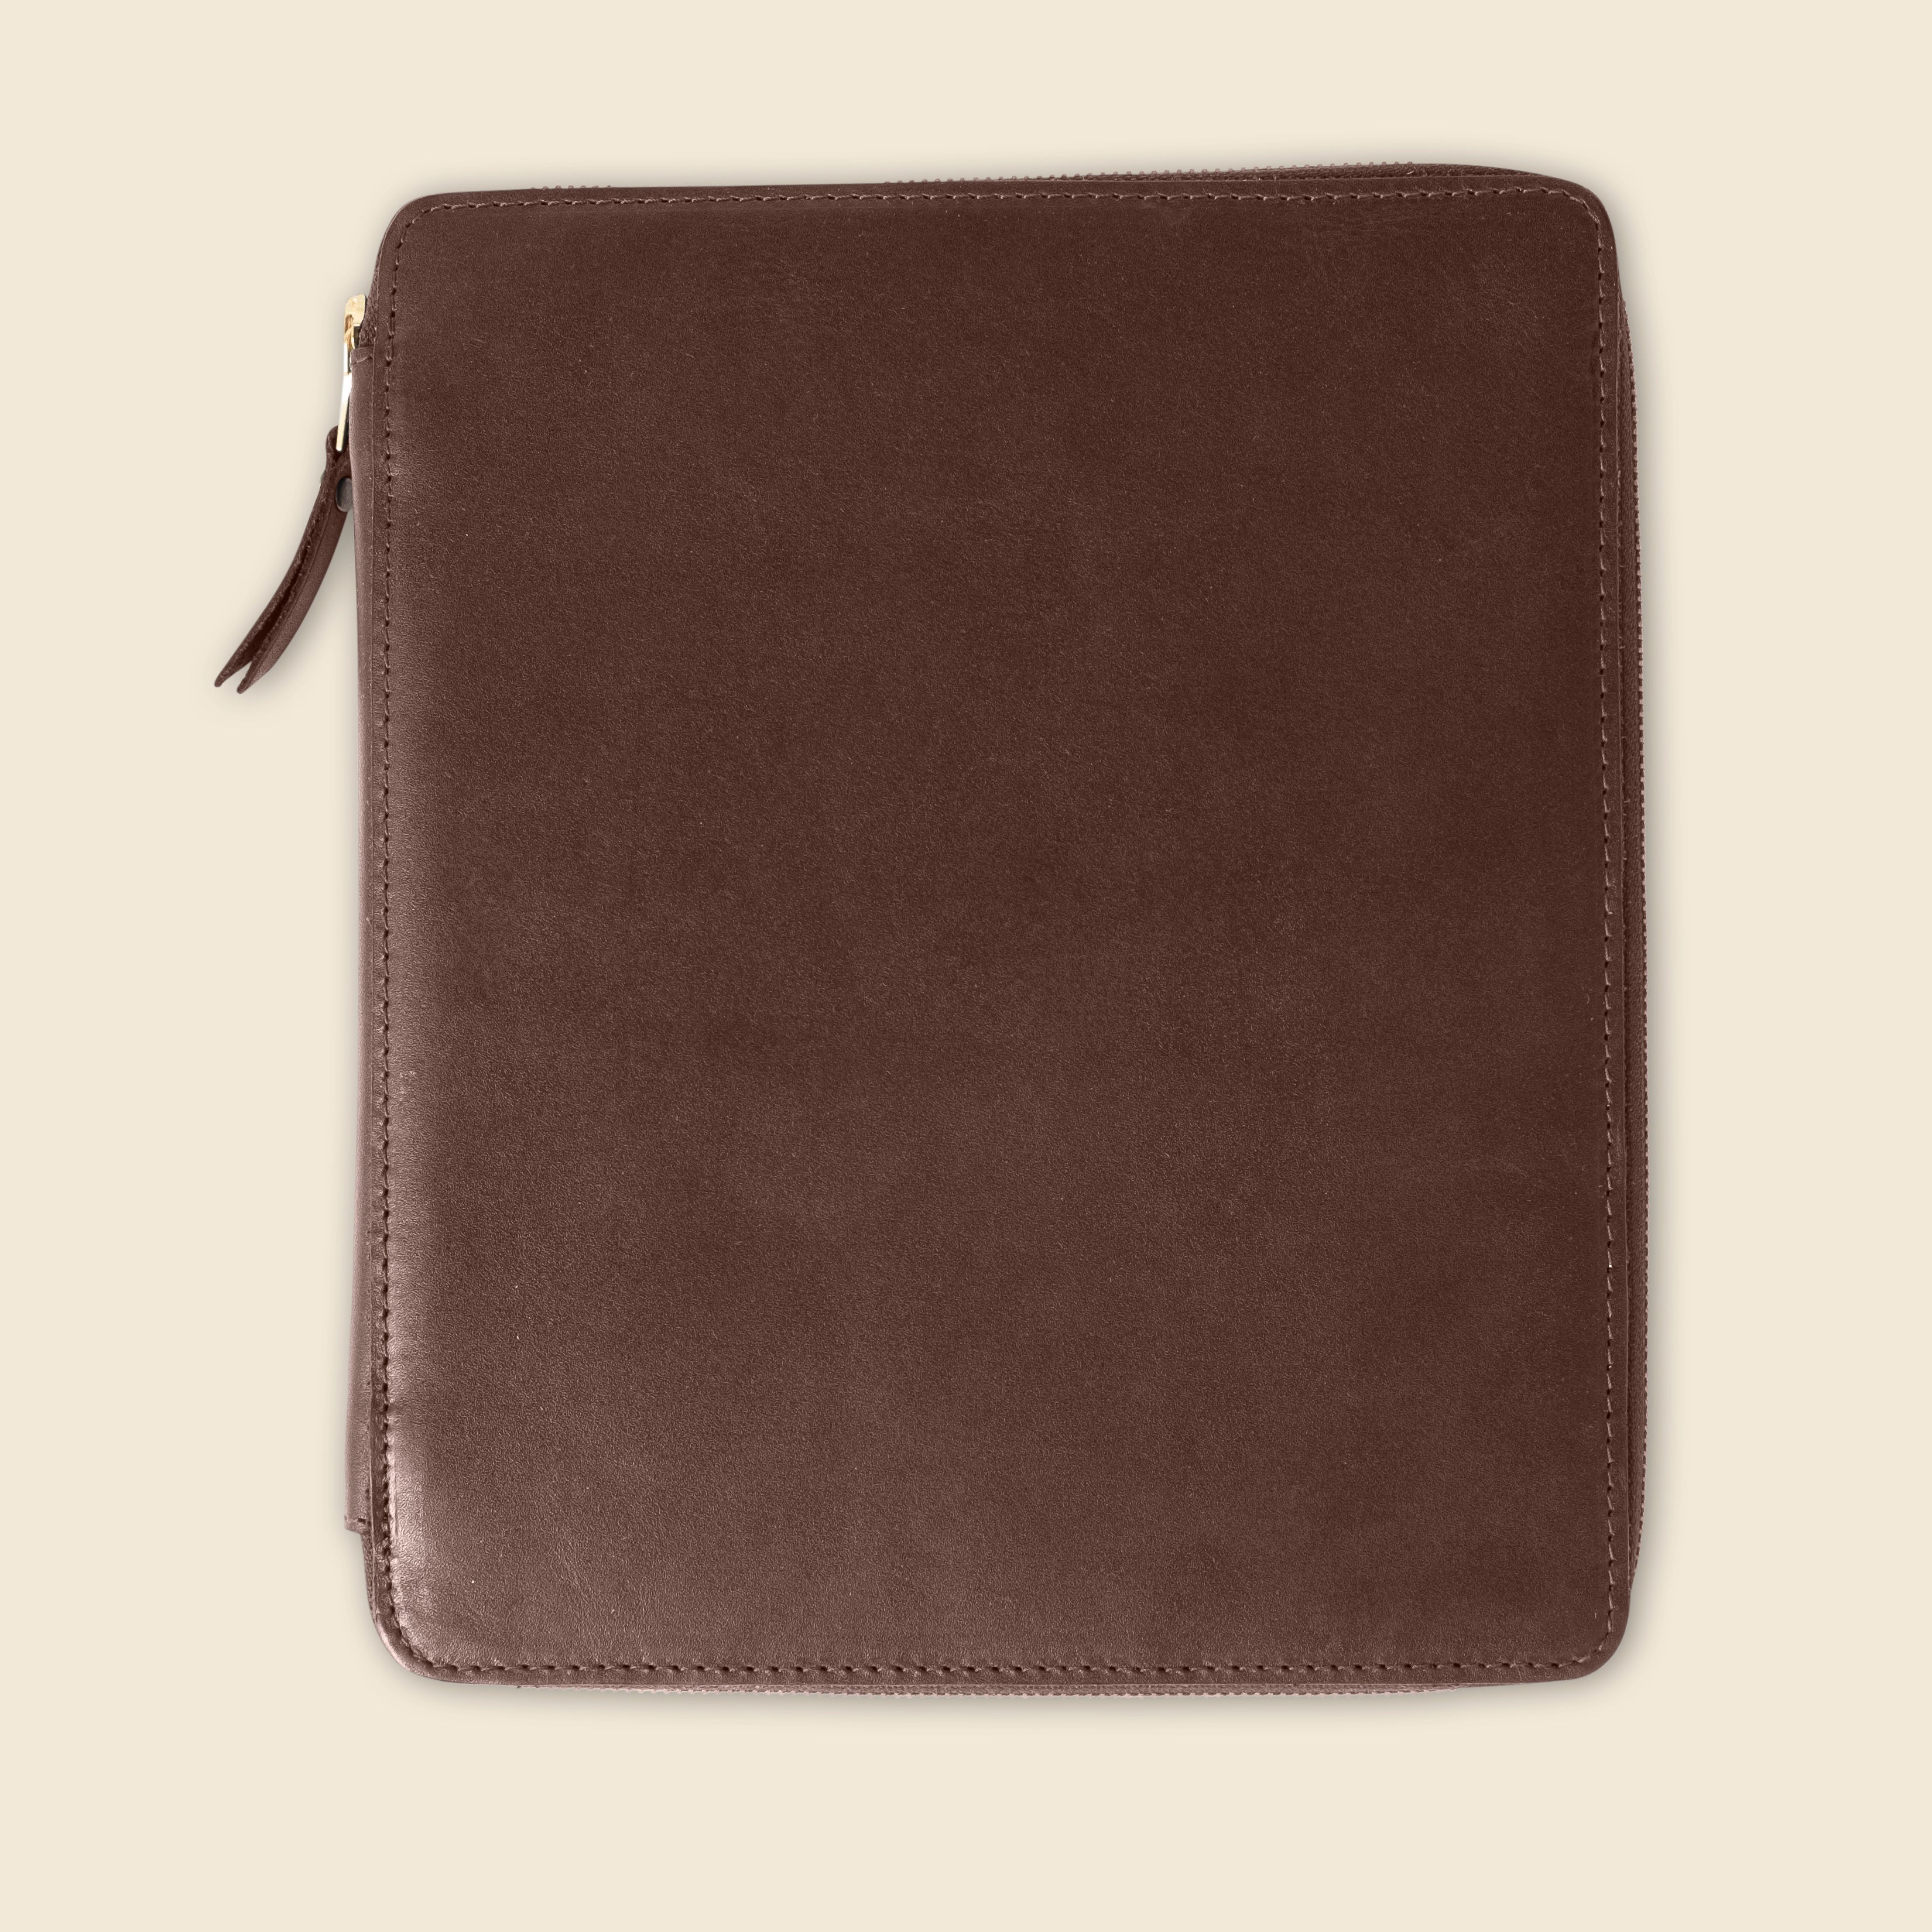 Brown leather executive gifting companies